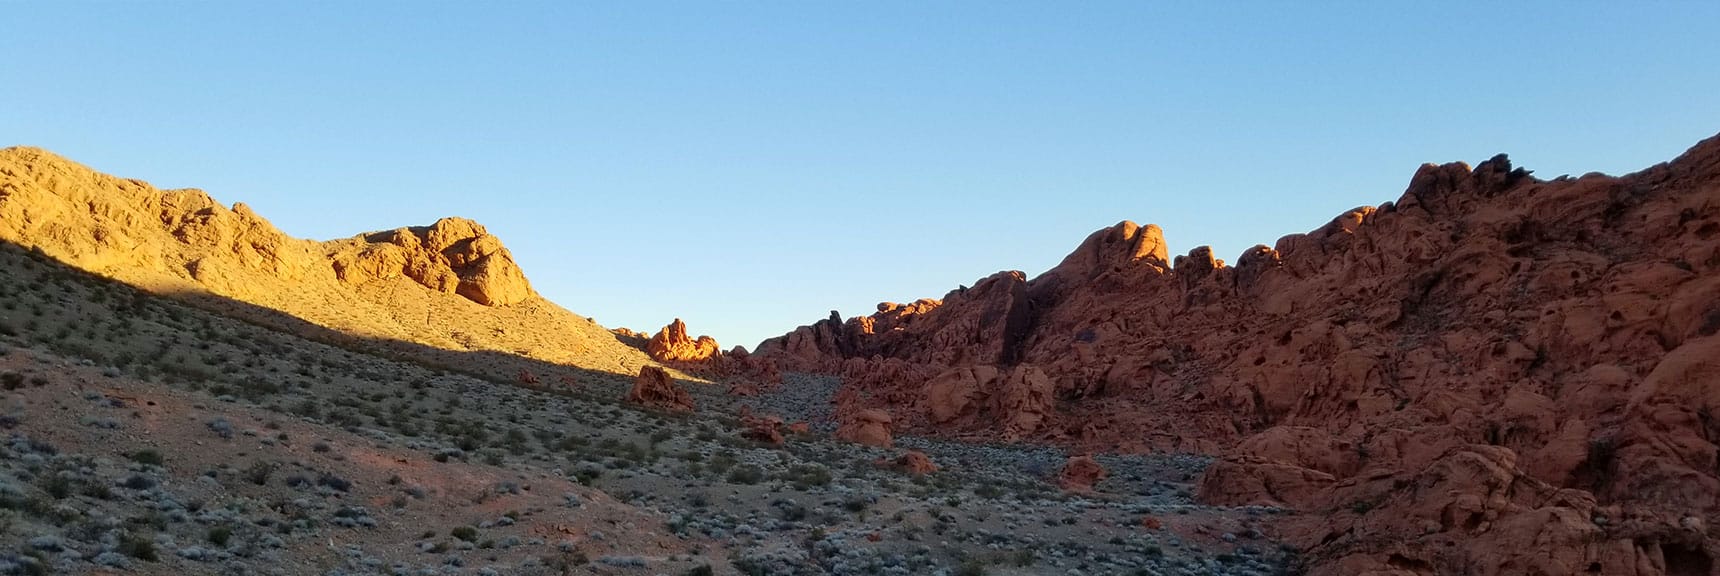 Ascending North Toward the Pass on Prospect Trail in Valley of Fire State Park, Nevada